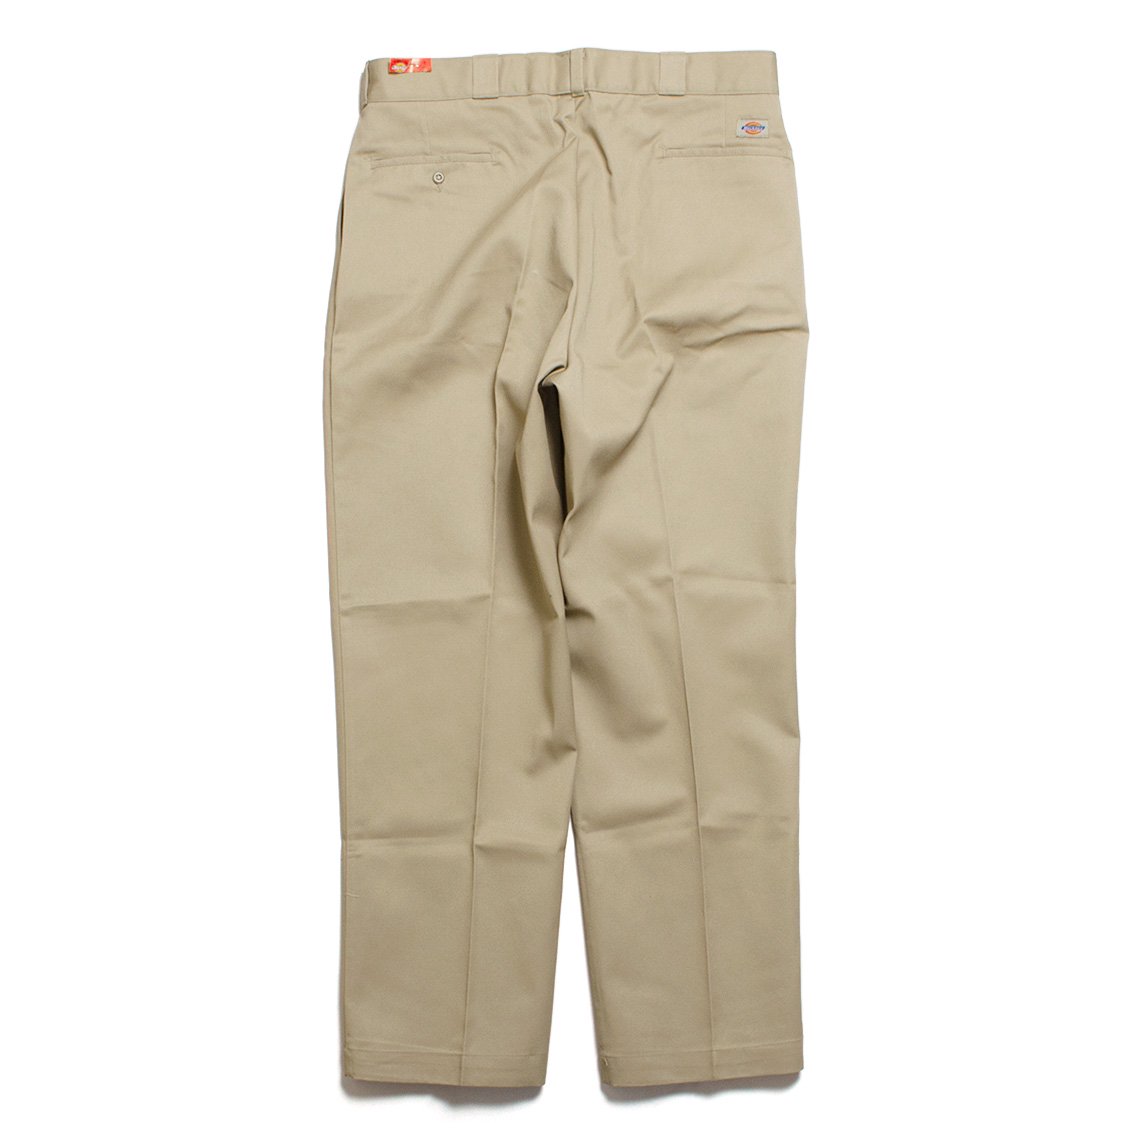 Dickies / ディッキーズ]874 Work Pants 90s ワークパンツ アメリカ製 